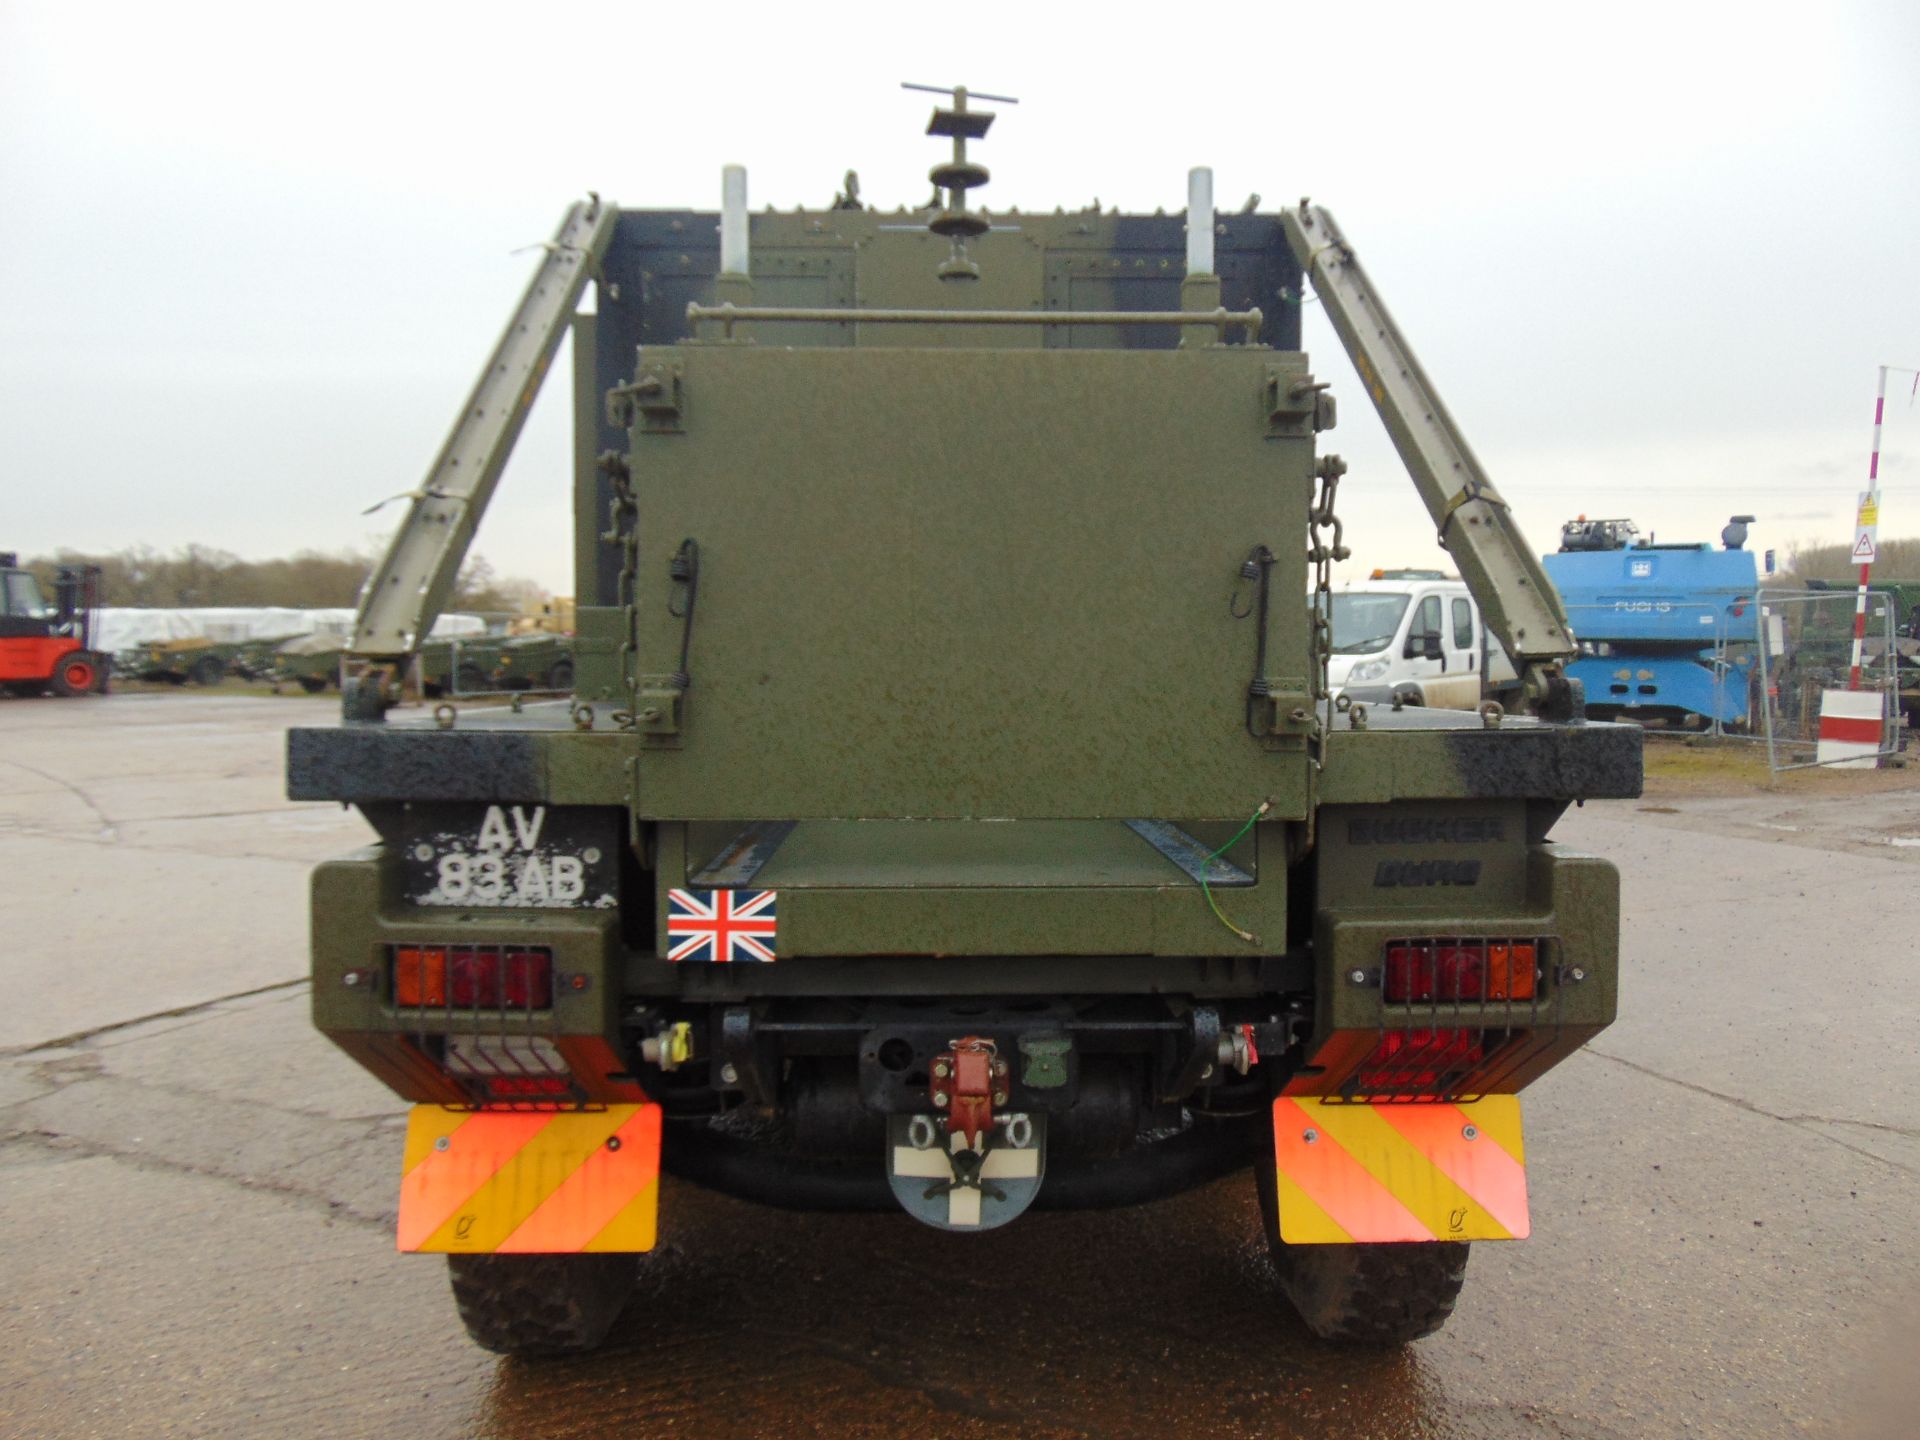 Ex Reserve Left Hand Drive Mowag Bucher Duro II 6x6 High-Mobility Tactical Vehicle. - Image 7 of 16